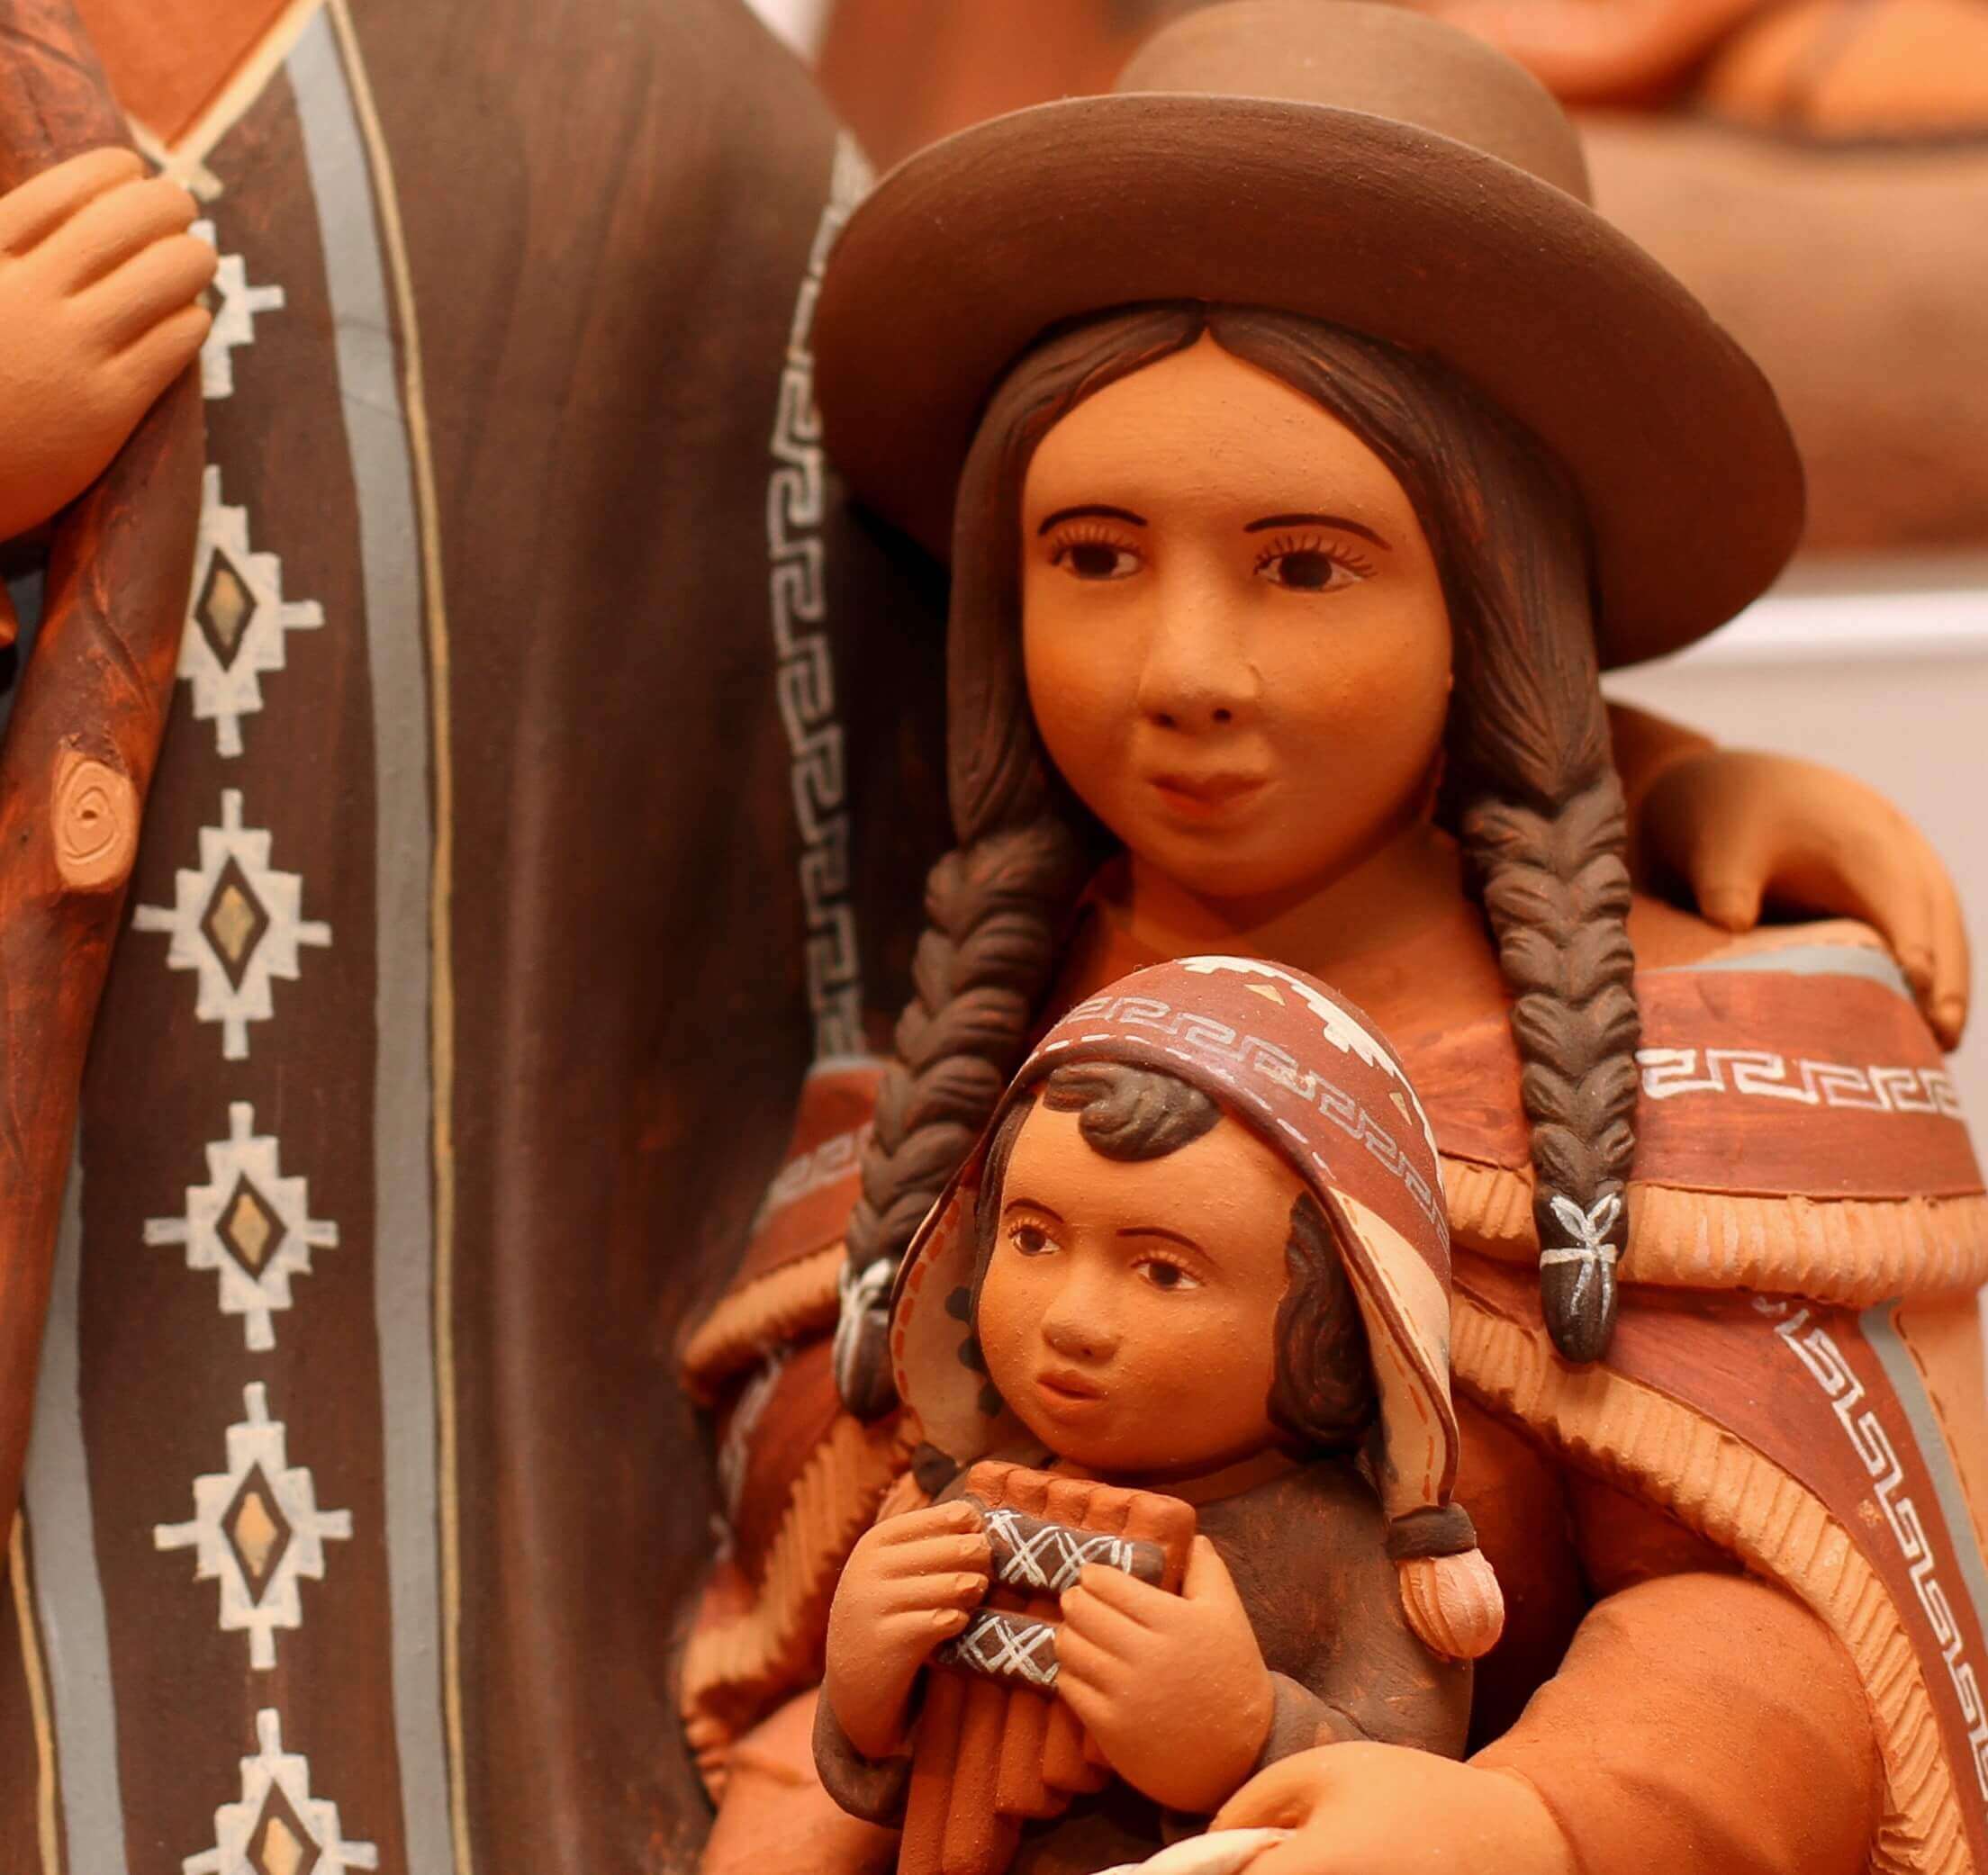 A terra cotta figurine of a indigenous South American family.